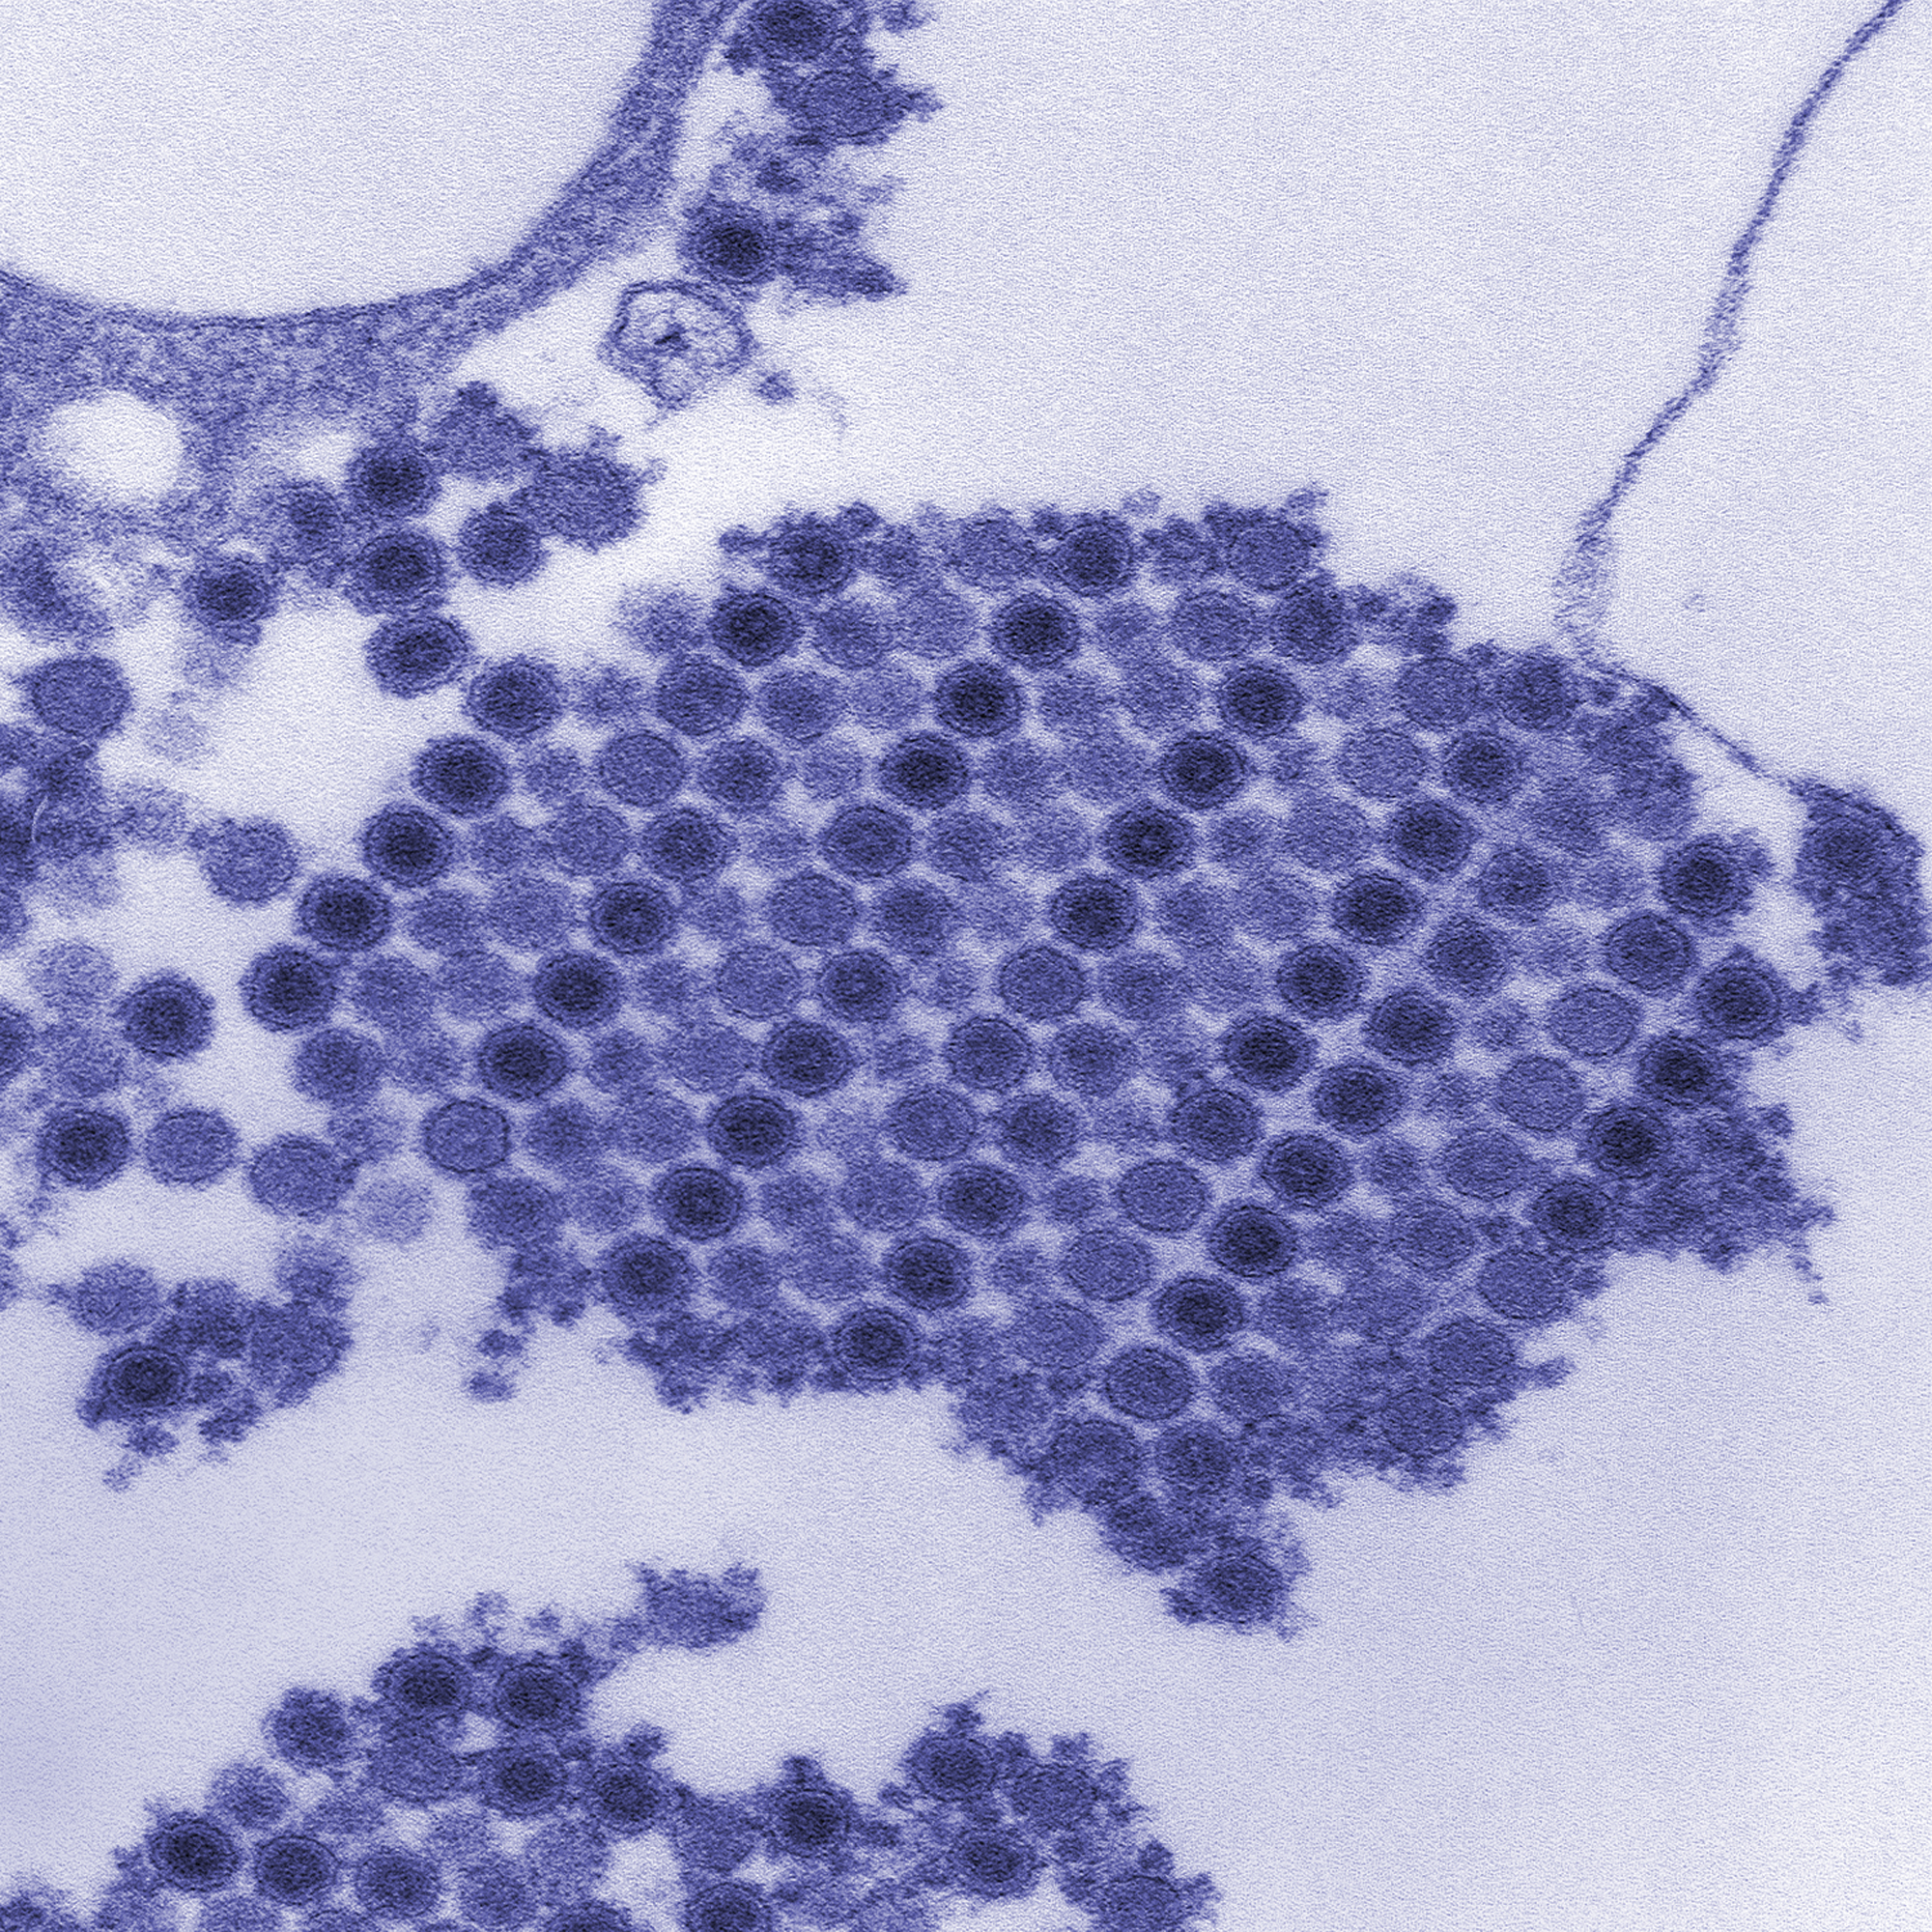 Transmission electron micrograph depicts numerous Chikungunya virus particles. Image courtesy of the Center for Disease Control and Prevention.